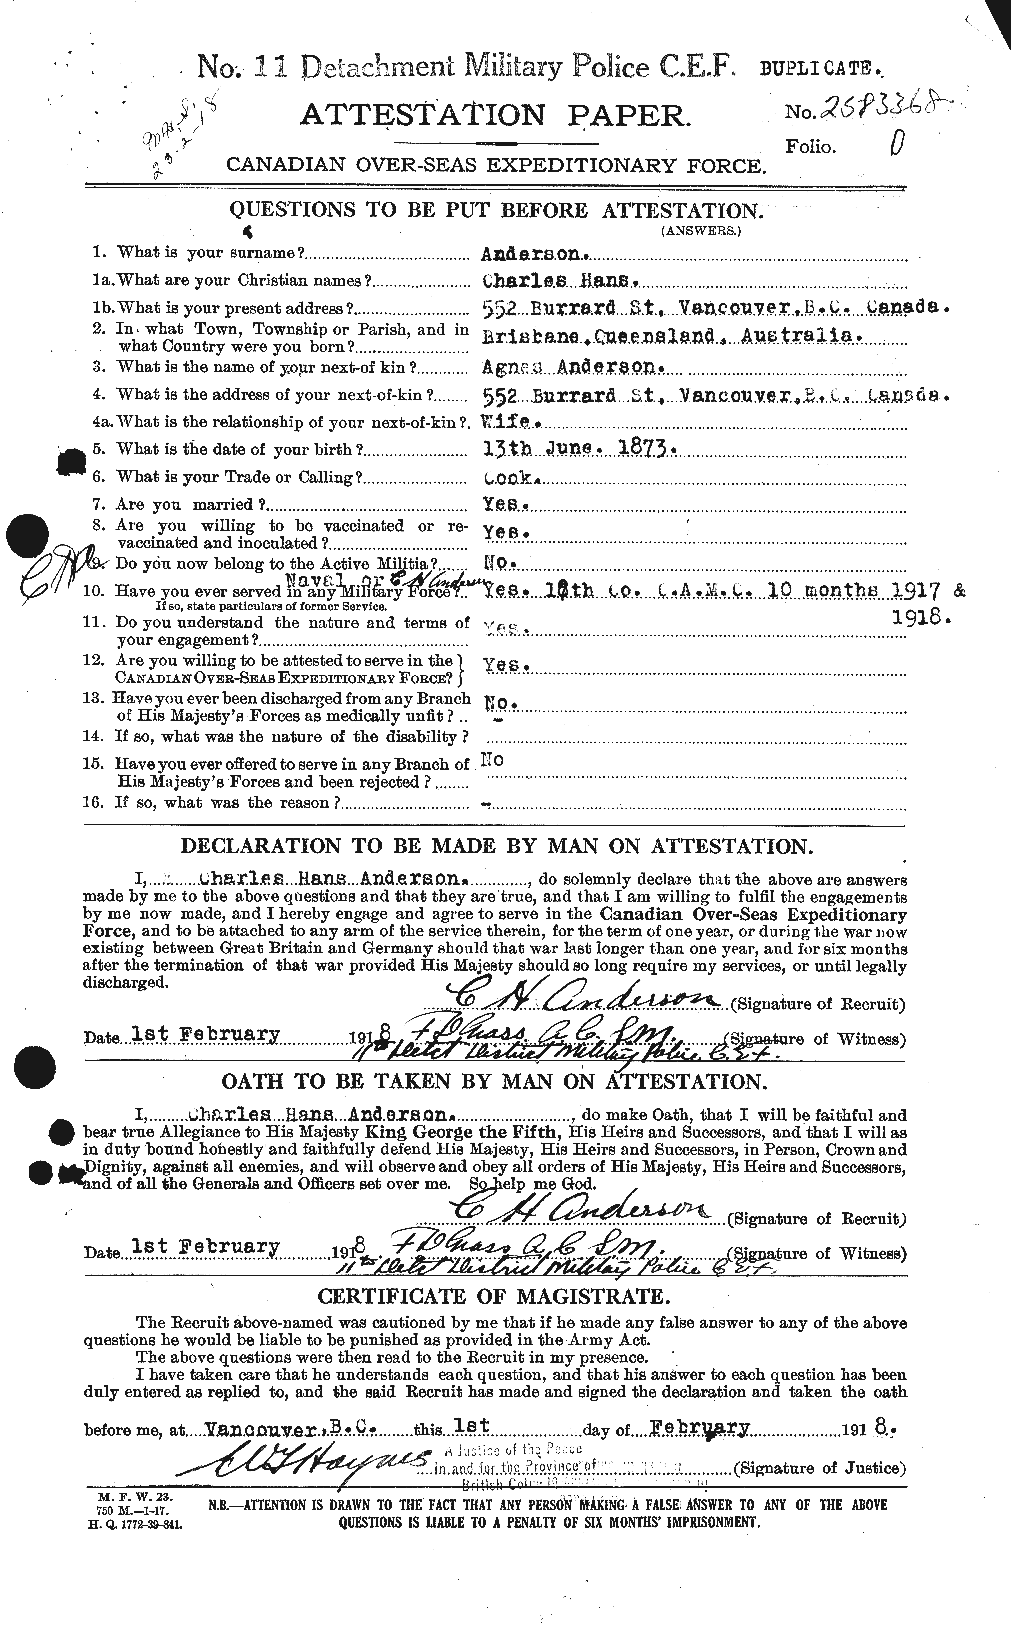 Personnel Records of the First World War - CEF 209239a